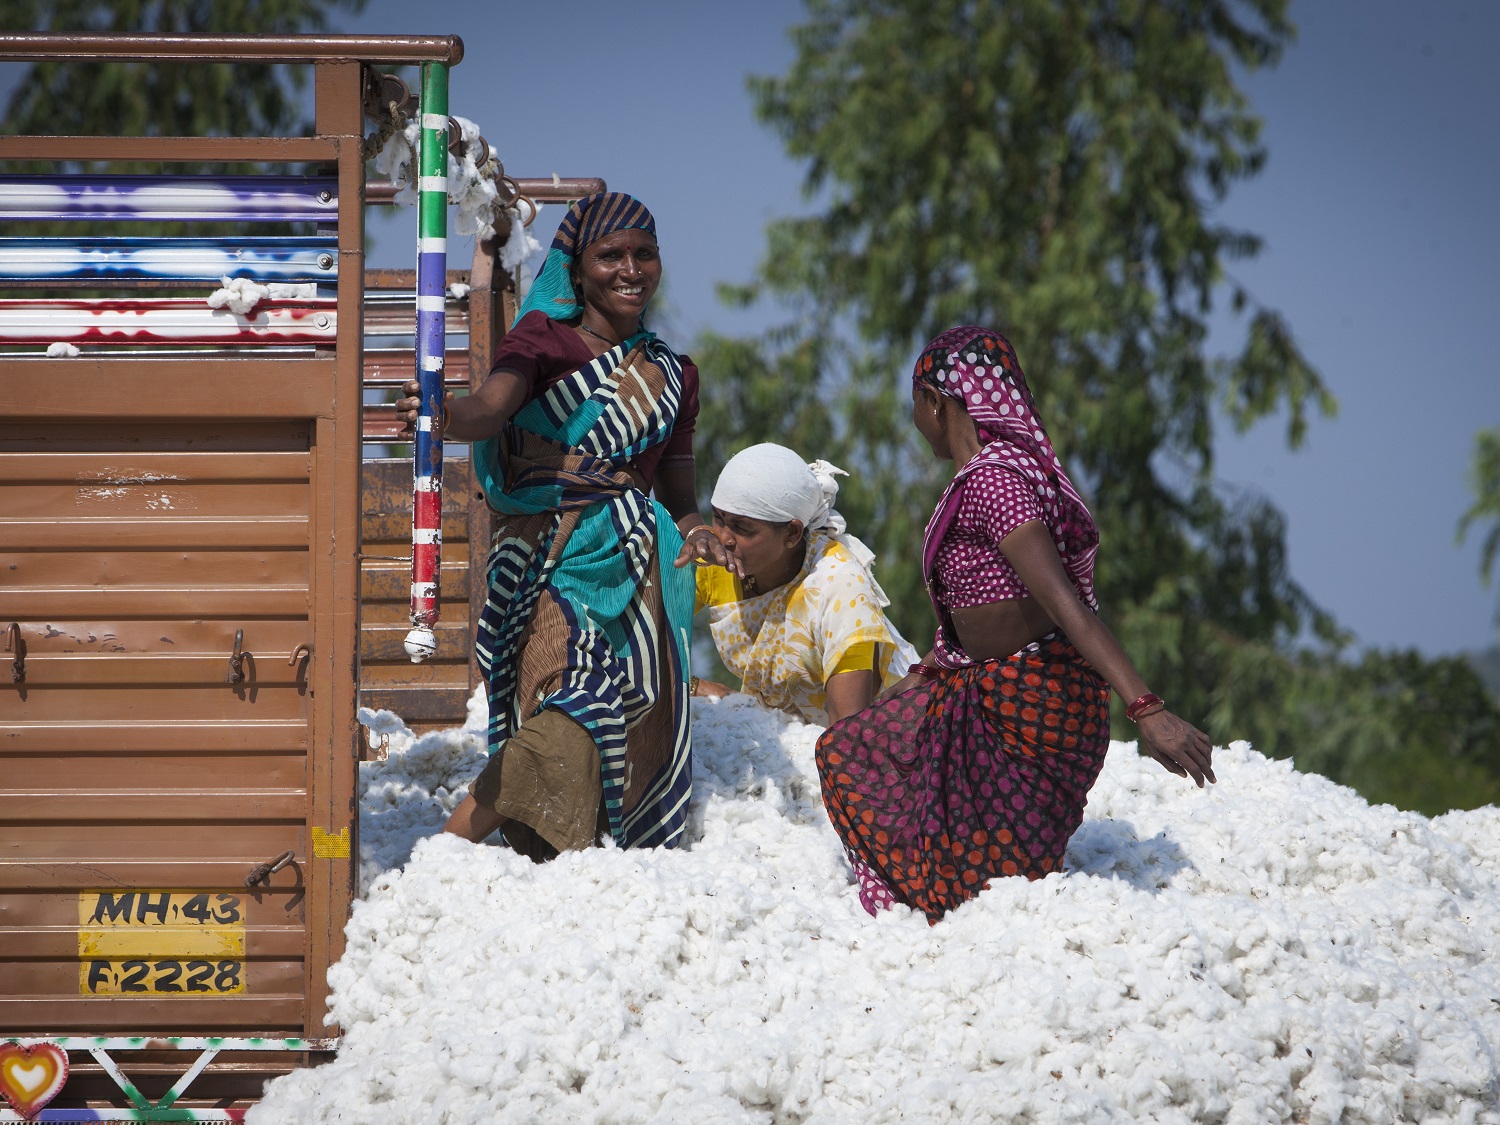 Farm workers loading cotton onto a truck. Credit Solidaridad.